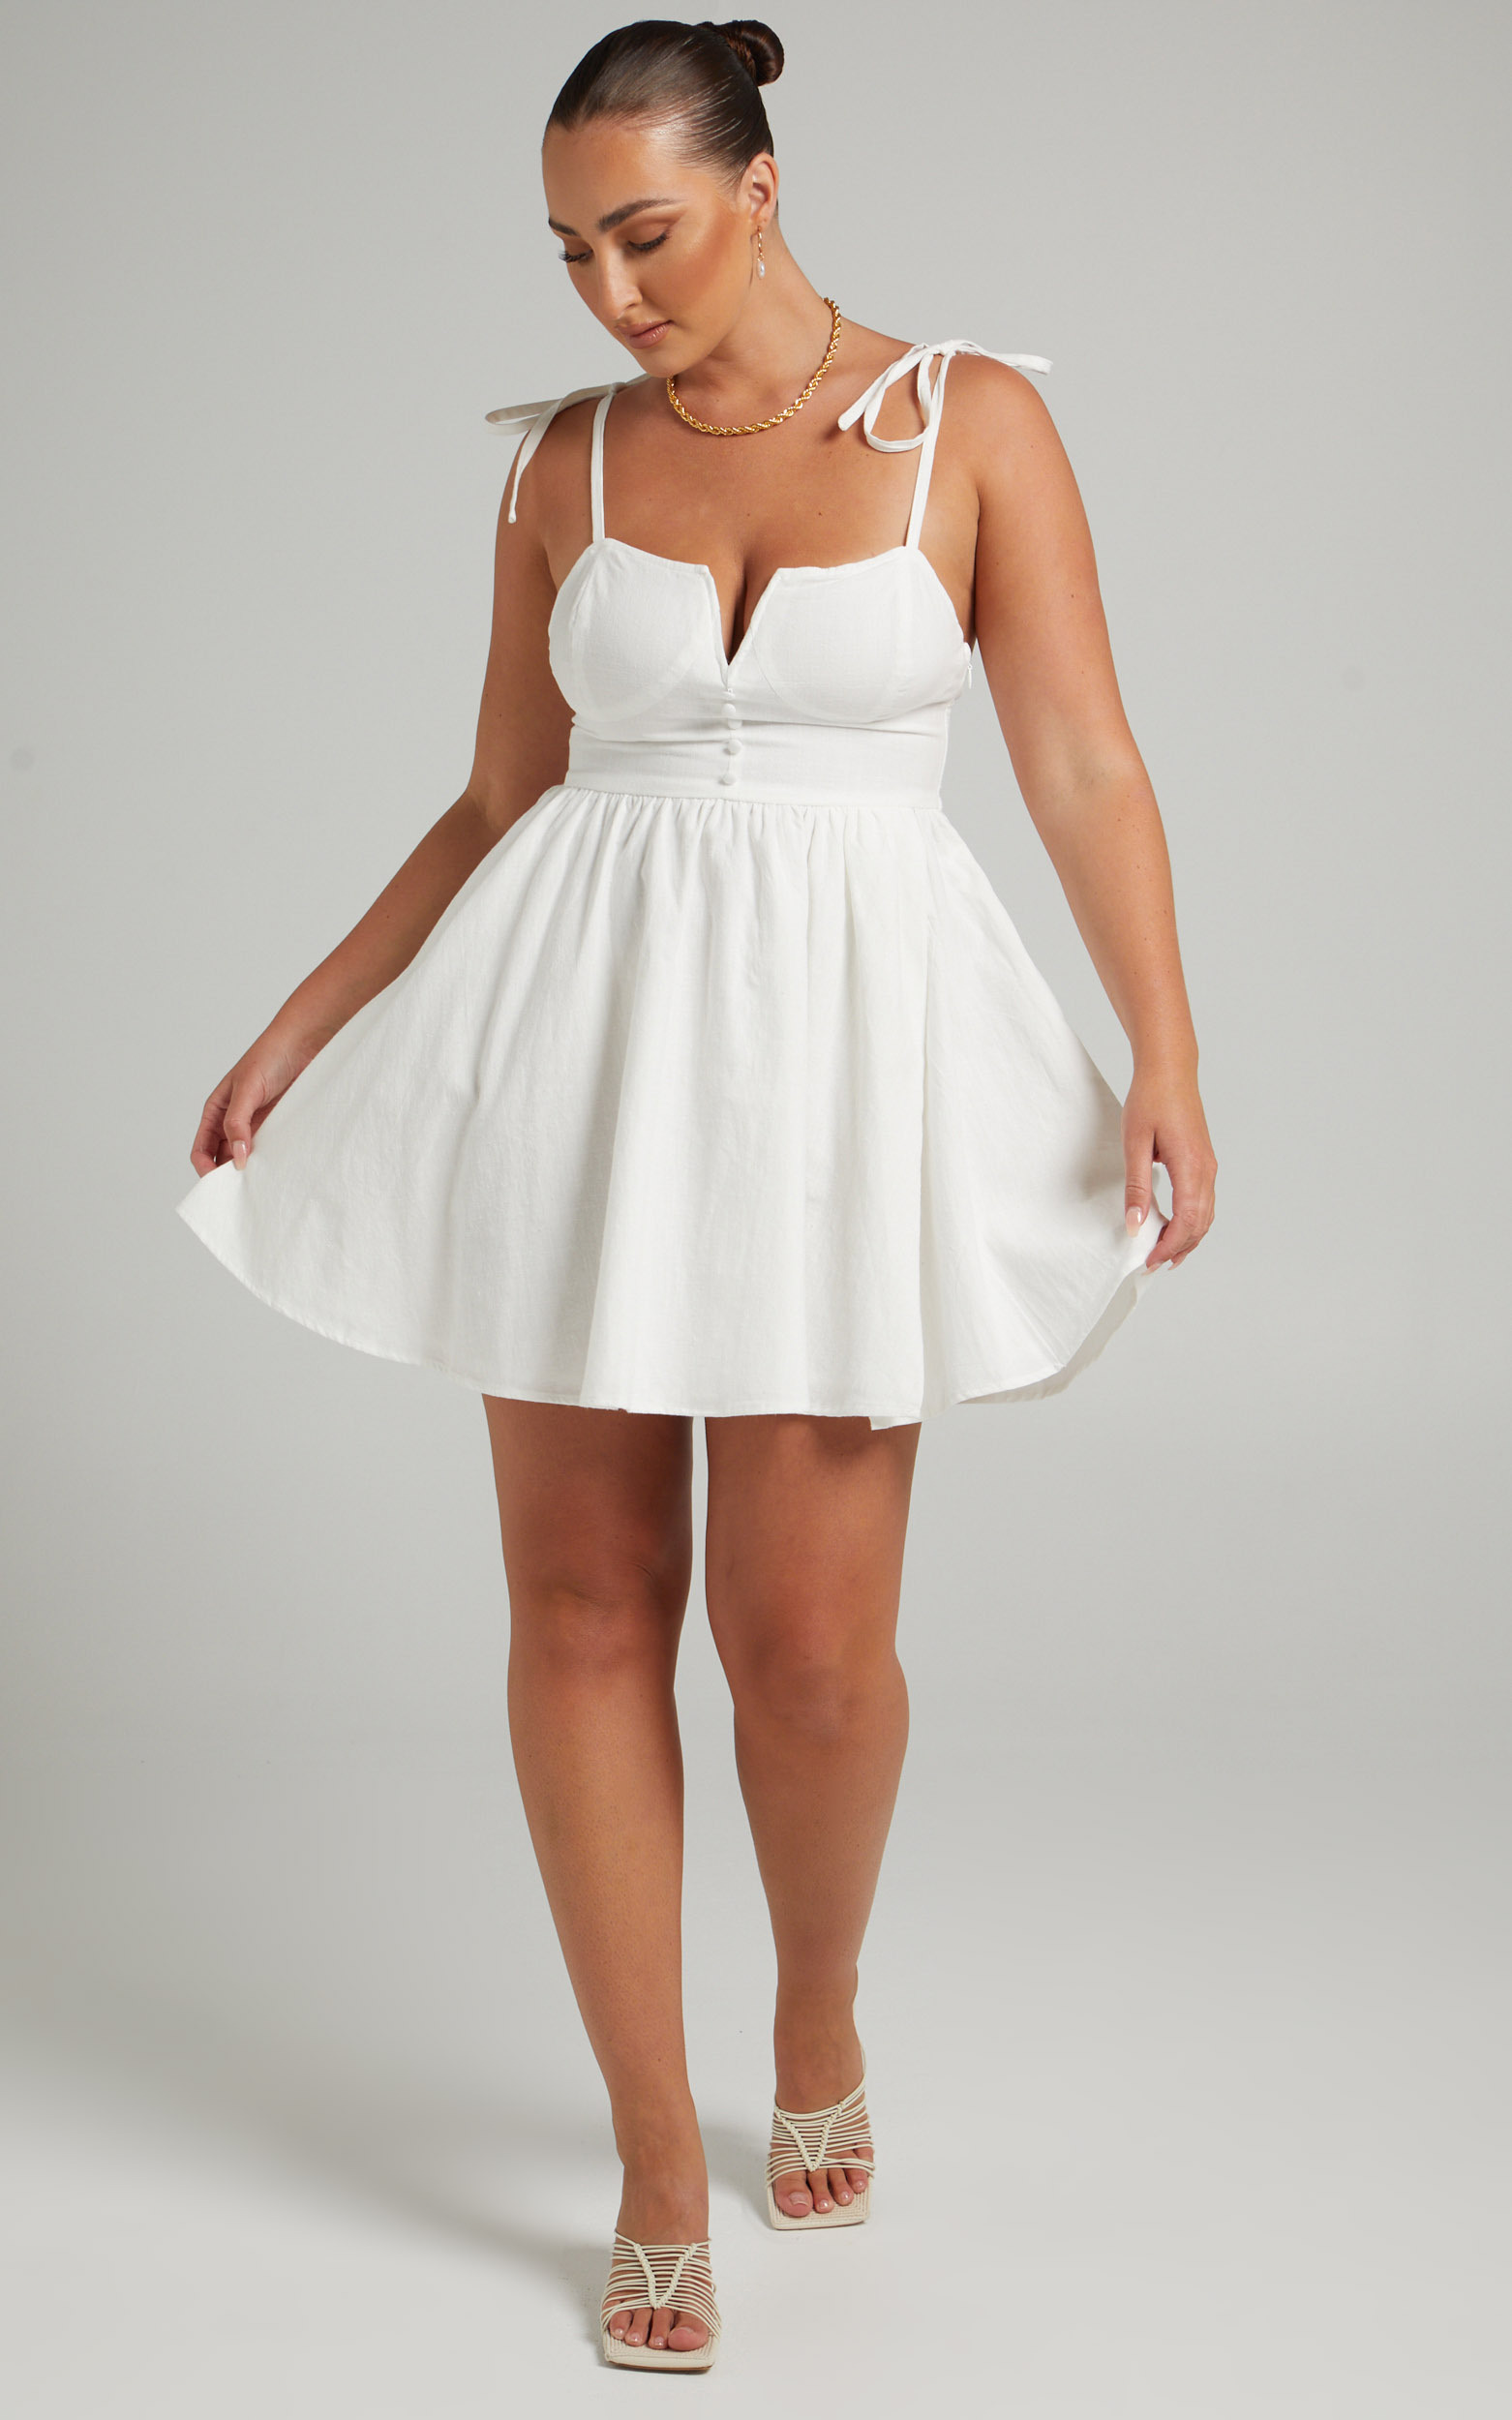 Fedelle Tie Strap Mini Dress in White - 06, WHT1, hi-res image number null